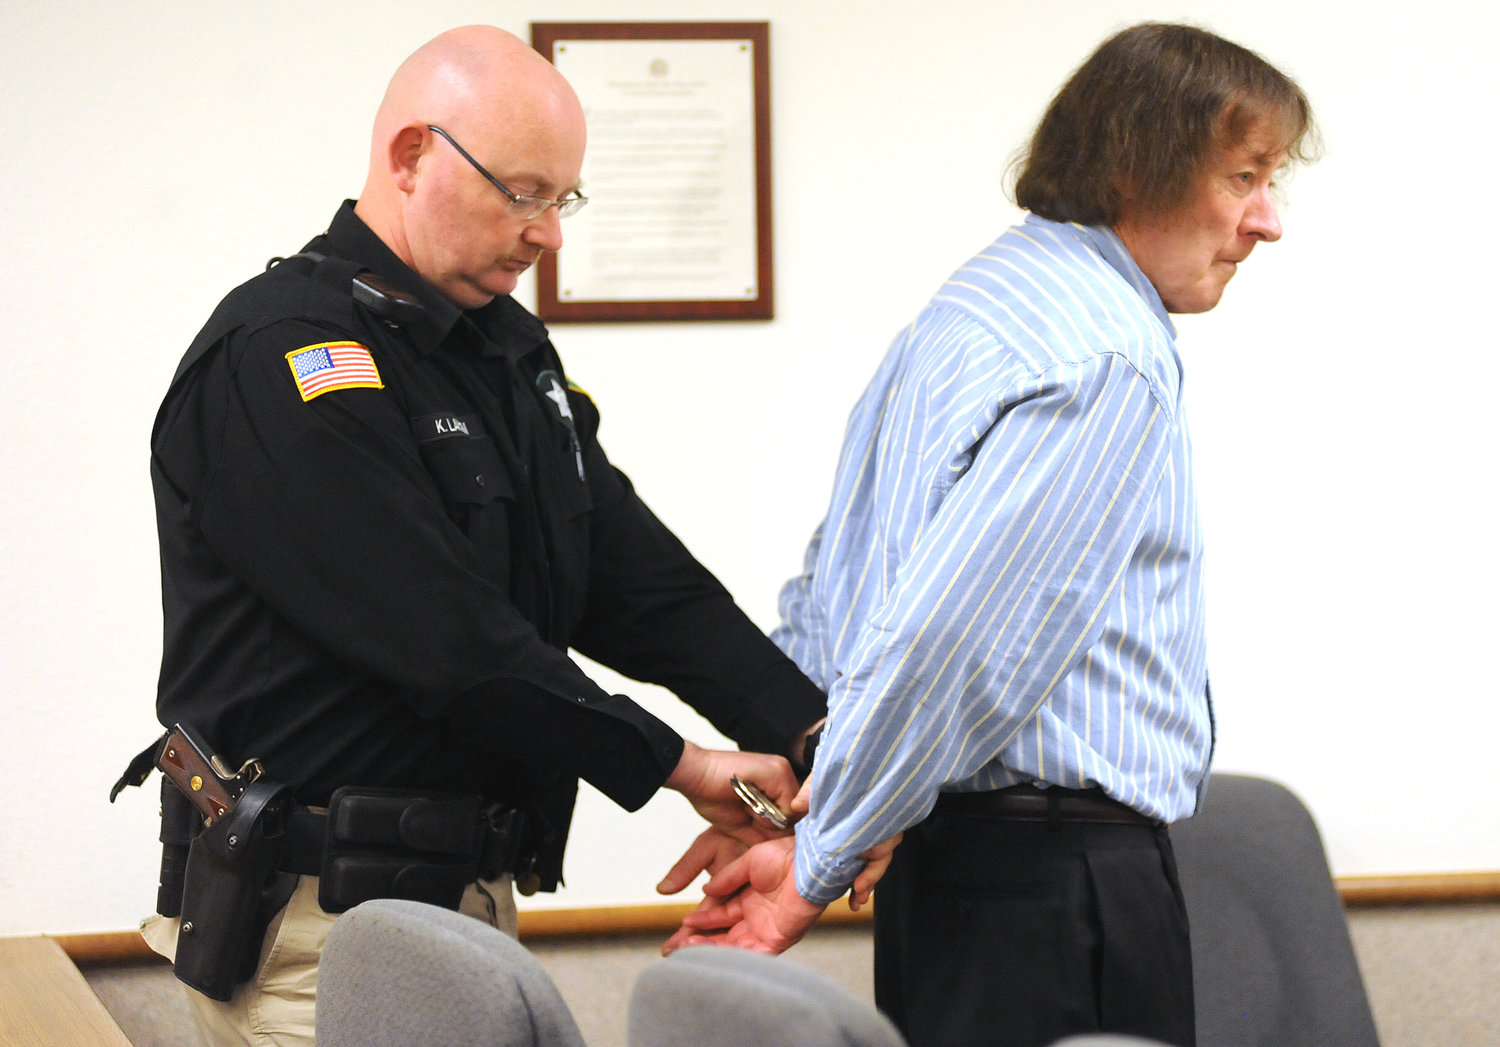 Kenneth Slert is handcuffed in February 2010, following a jury’s guilty verdict in Lewis County Superior Court. Slert was convicted of second-degree murder in connection with a Packwood campsite shooting in 2000.